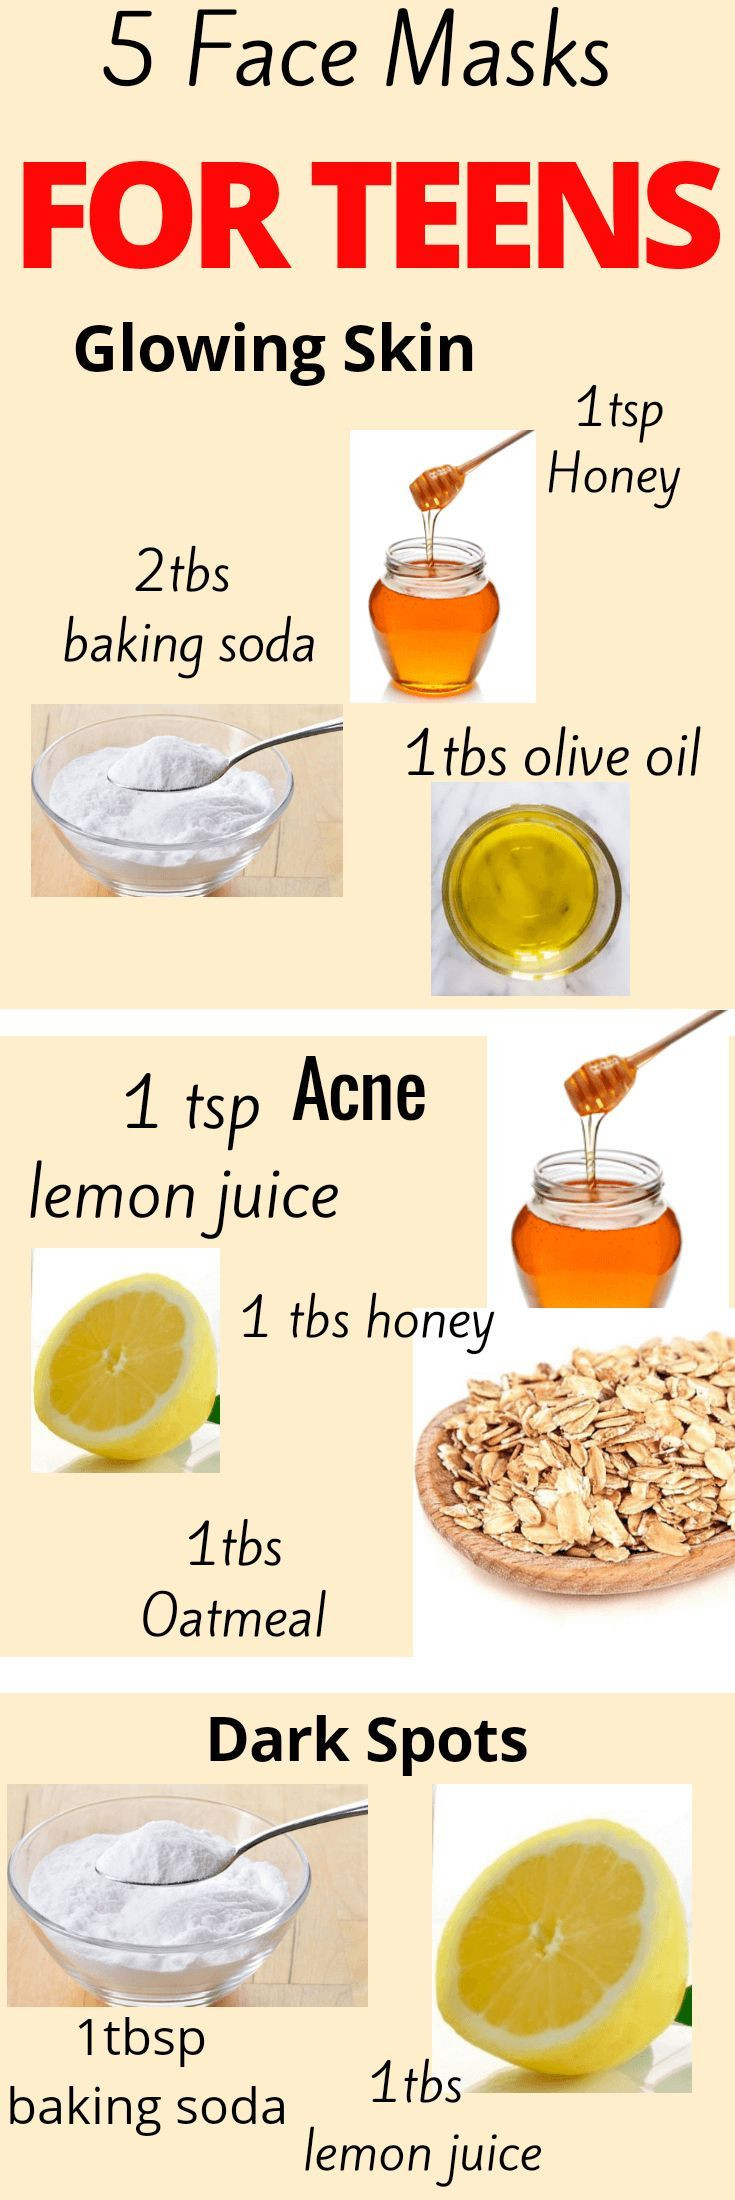 How To Make A DIY Face Mask
 Homemade Face Mask For Teens Skin care